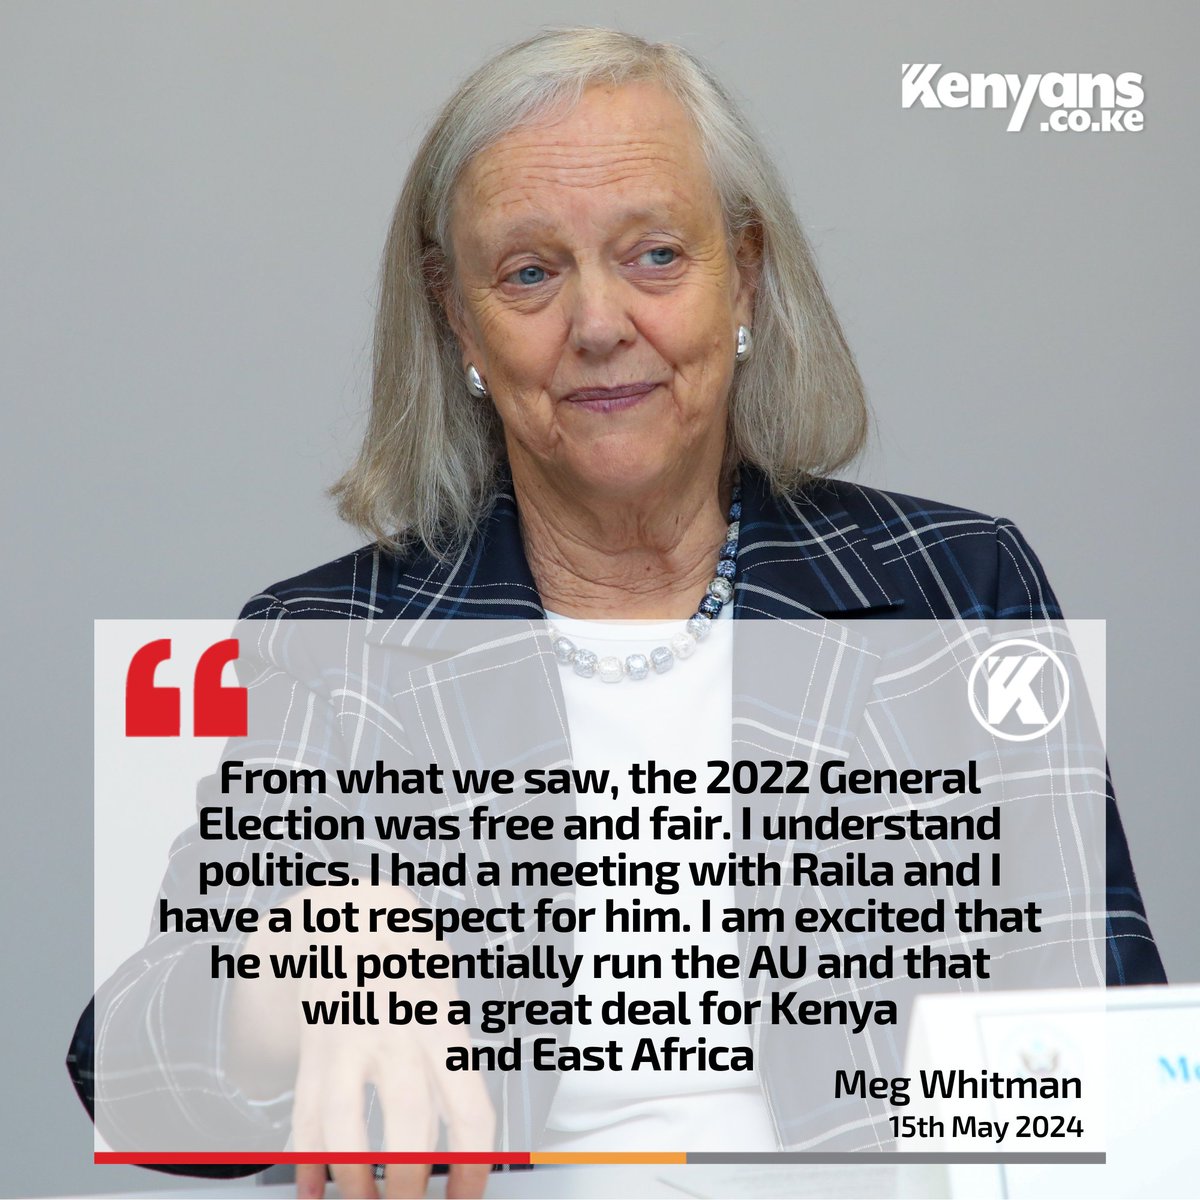 From what we saw, the 2022 General Election was free and fair - US Ambassador to Kenya, Meg Whitman